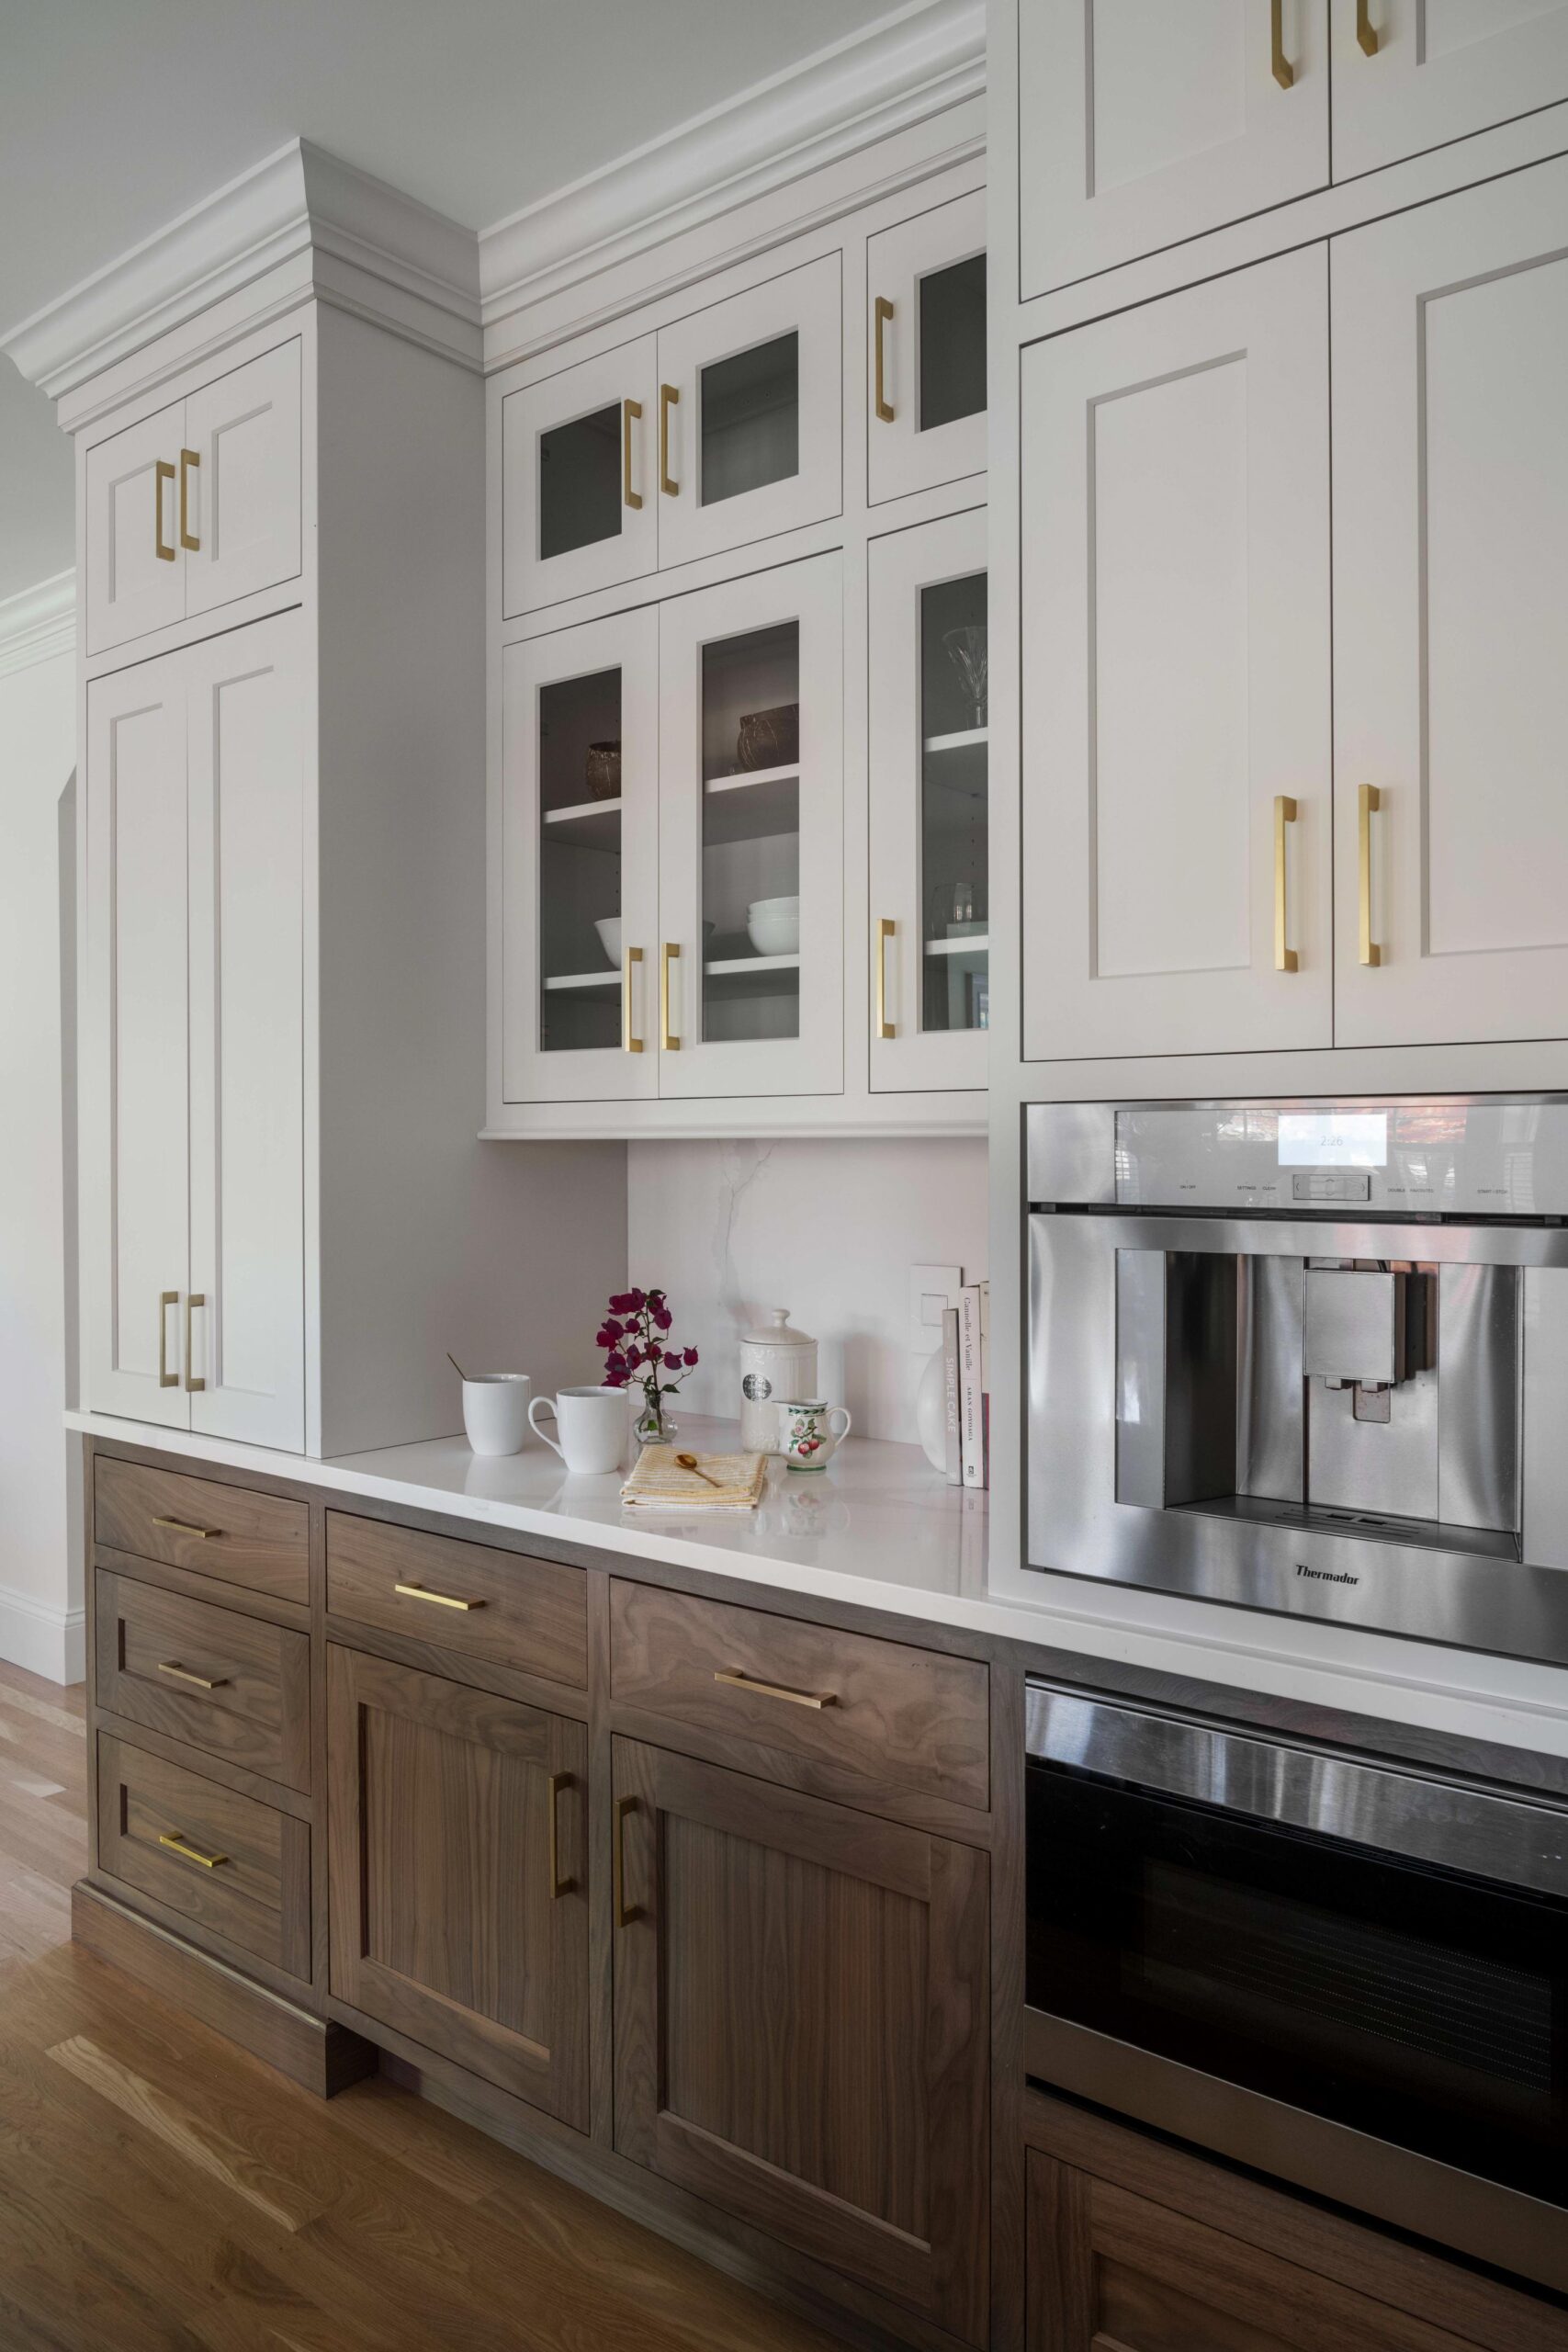 White and wooden style kitchen cabinets. This kitchen also has a glass-front style top cabinets.